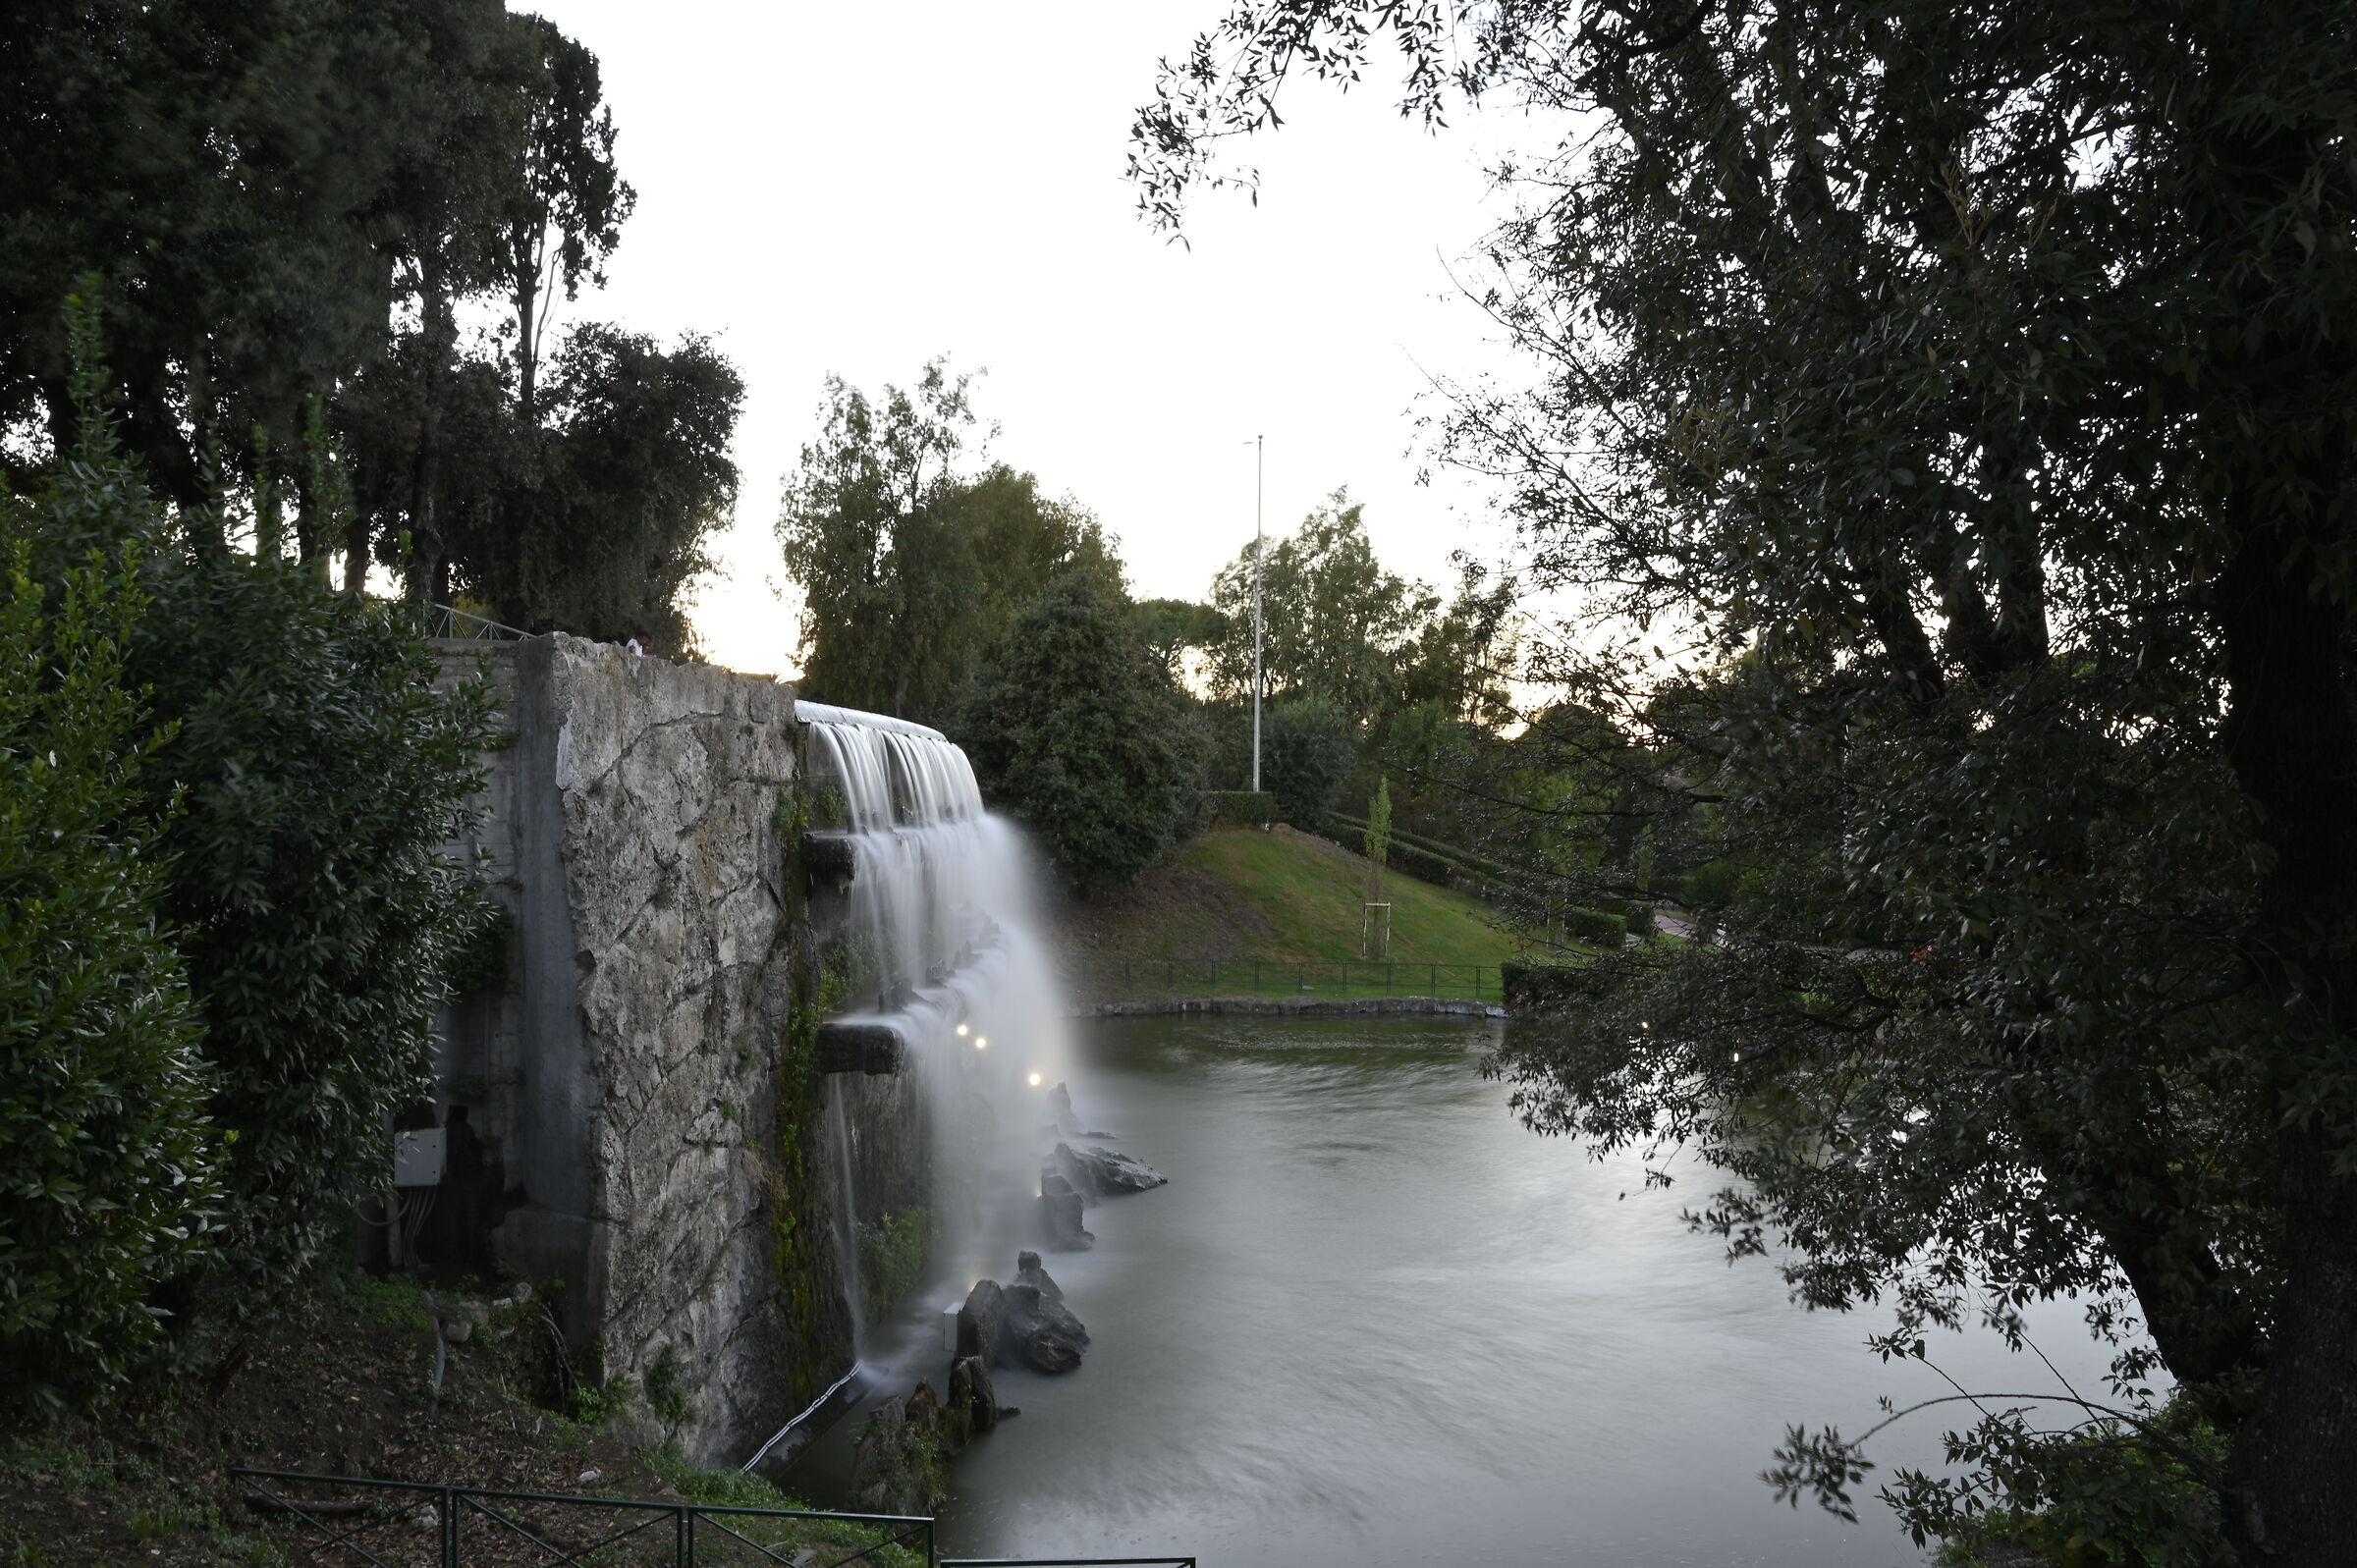 Garden of the waterfalls of the Eur pond...